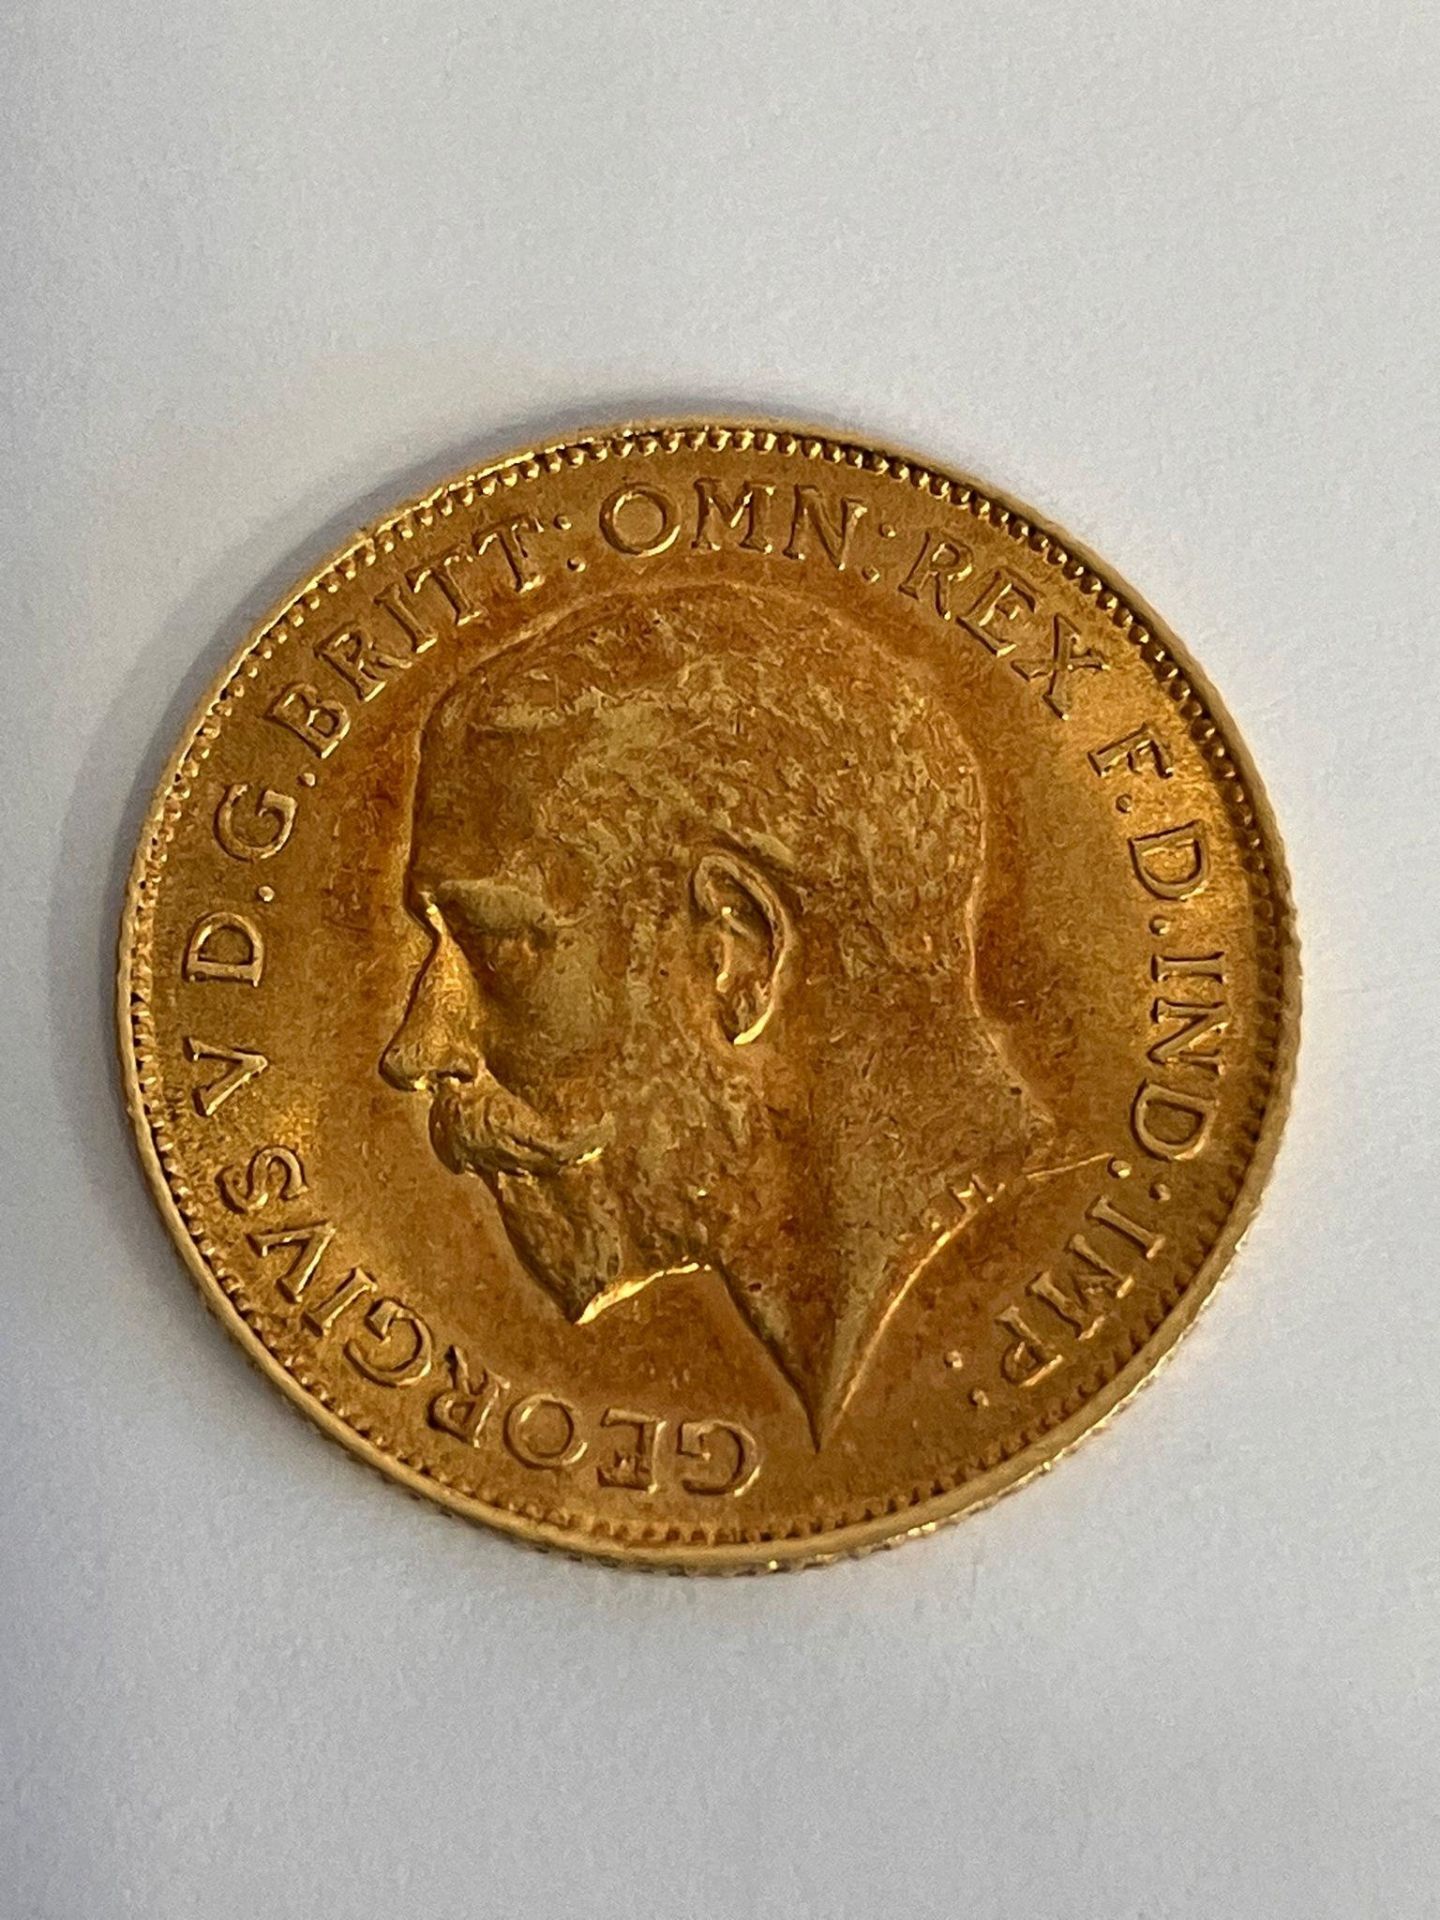 1914 GOLD HALF SOVEREIGN. Very fine condition. Please see pictures. - Image 2 of 2